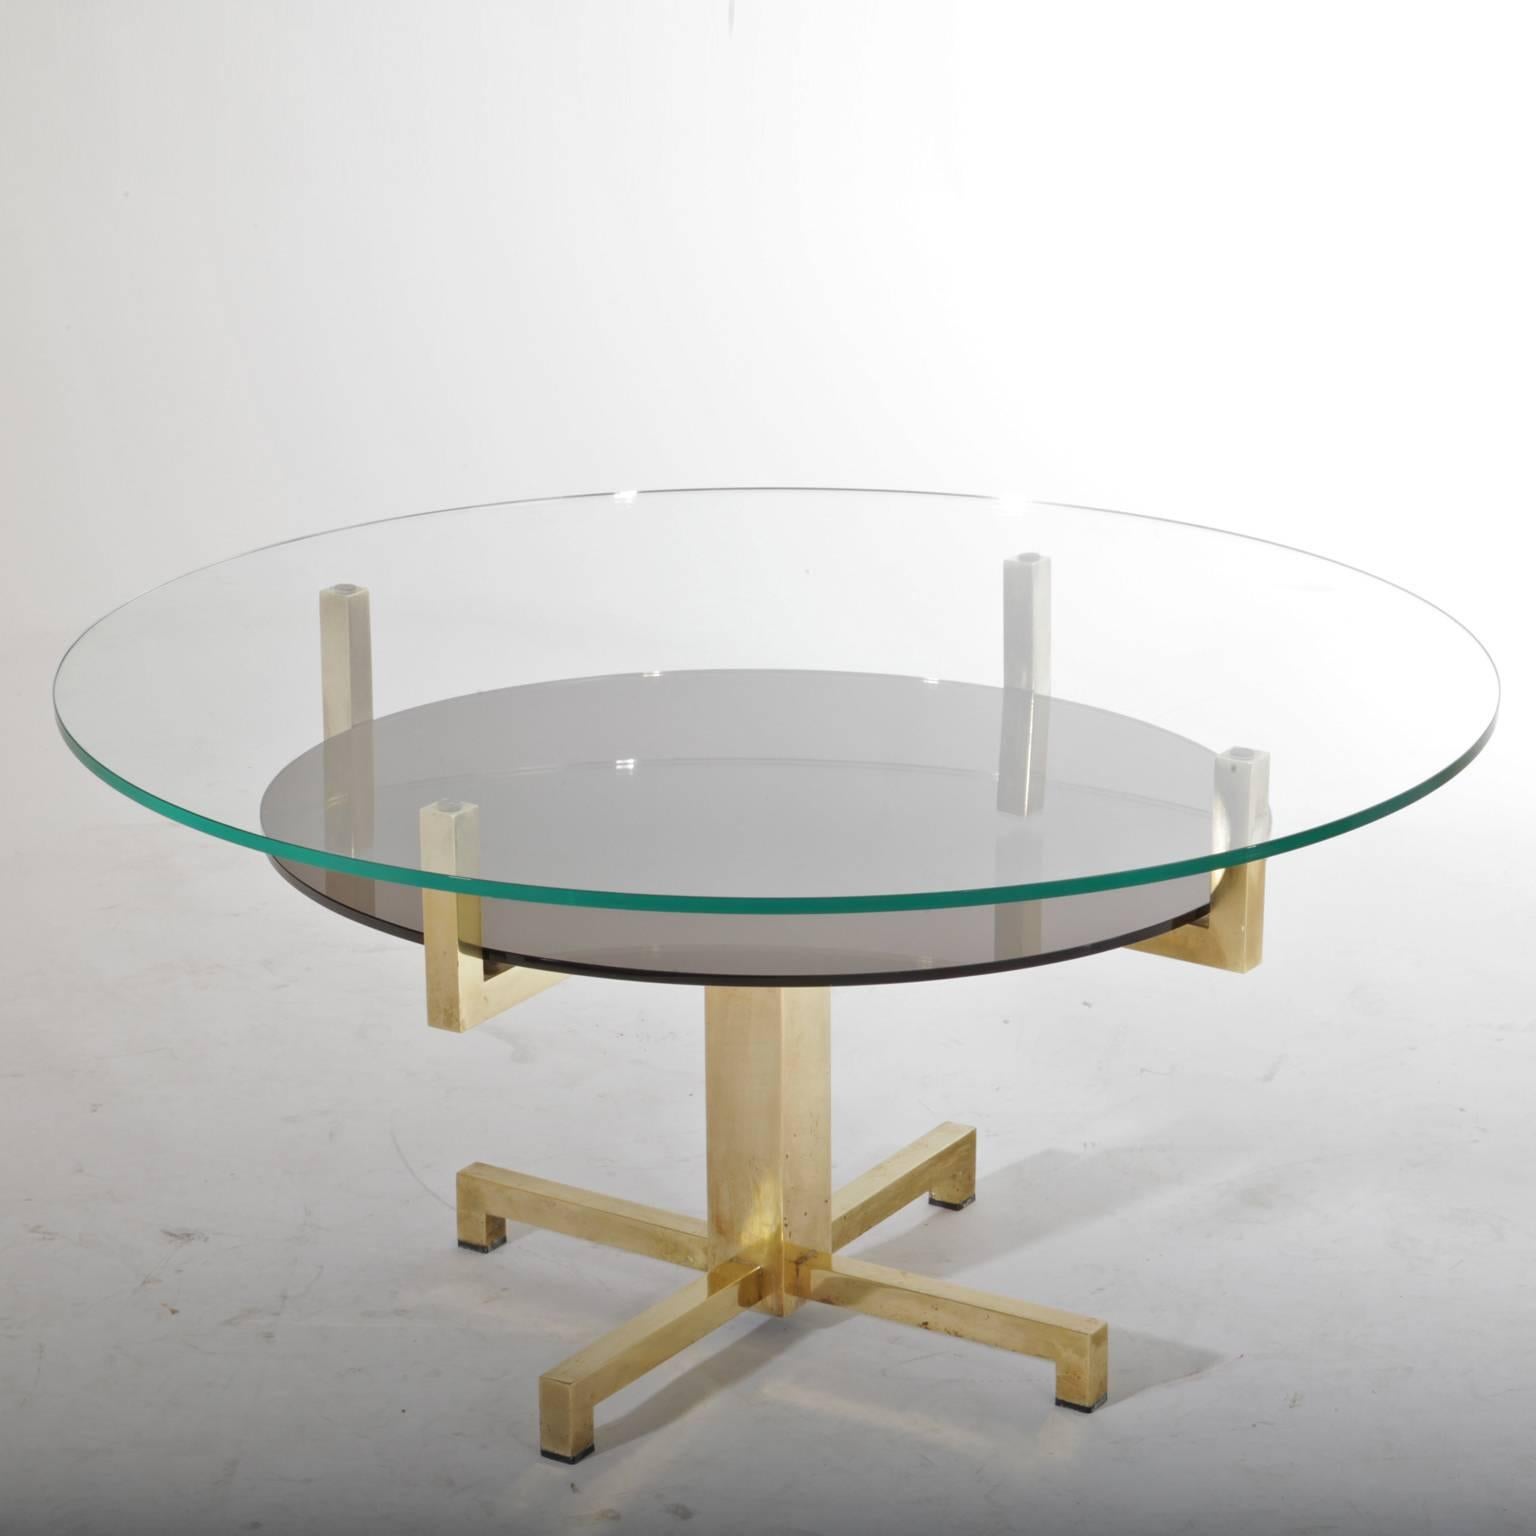 Coffee table with round glass tabletop on a x-shaped brass base. The lower shelf is smoked glass.